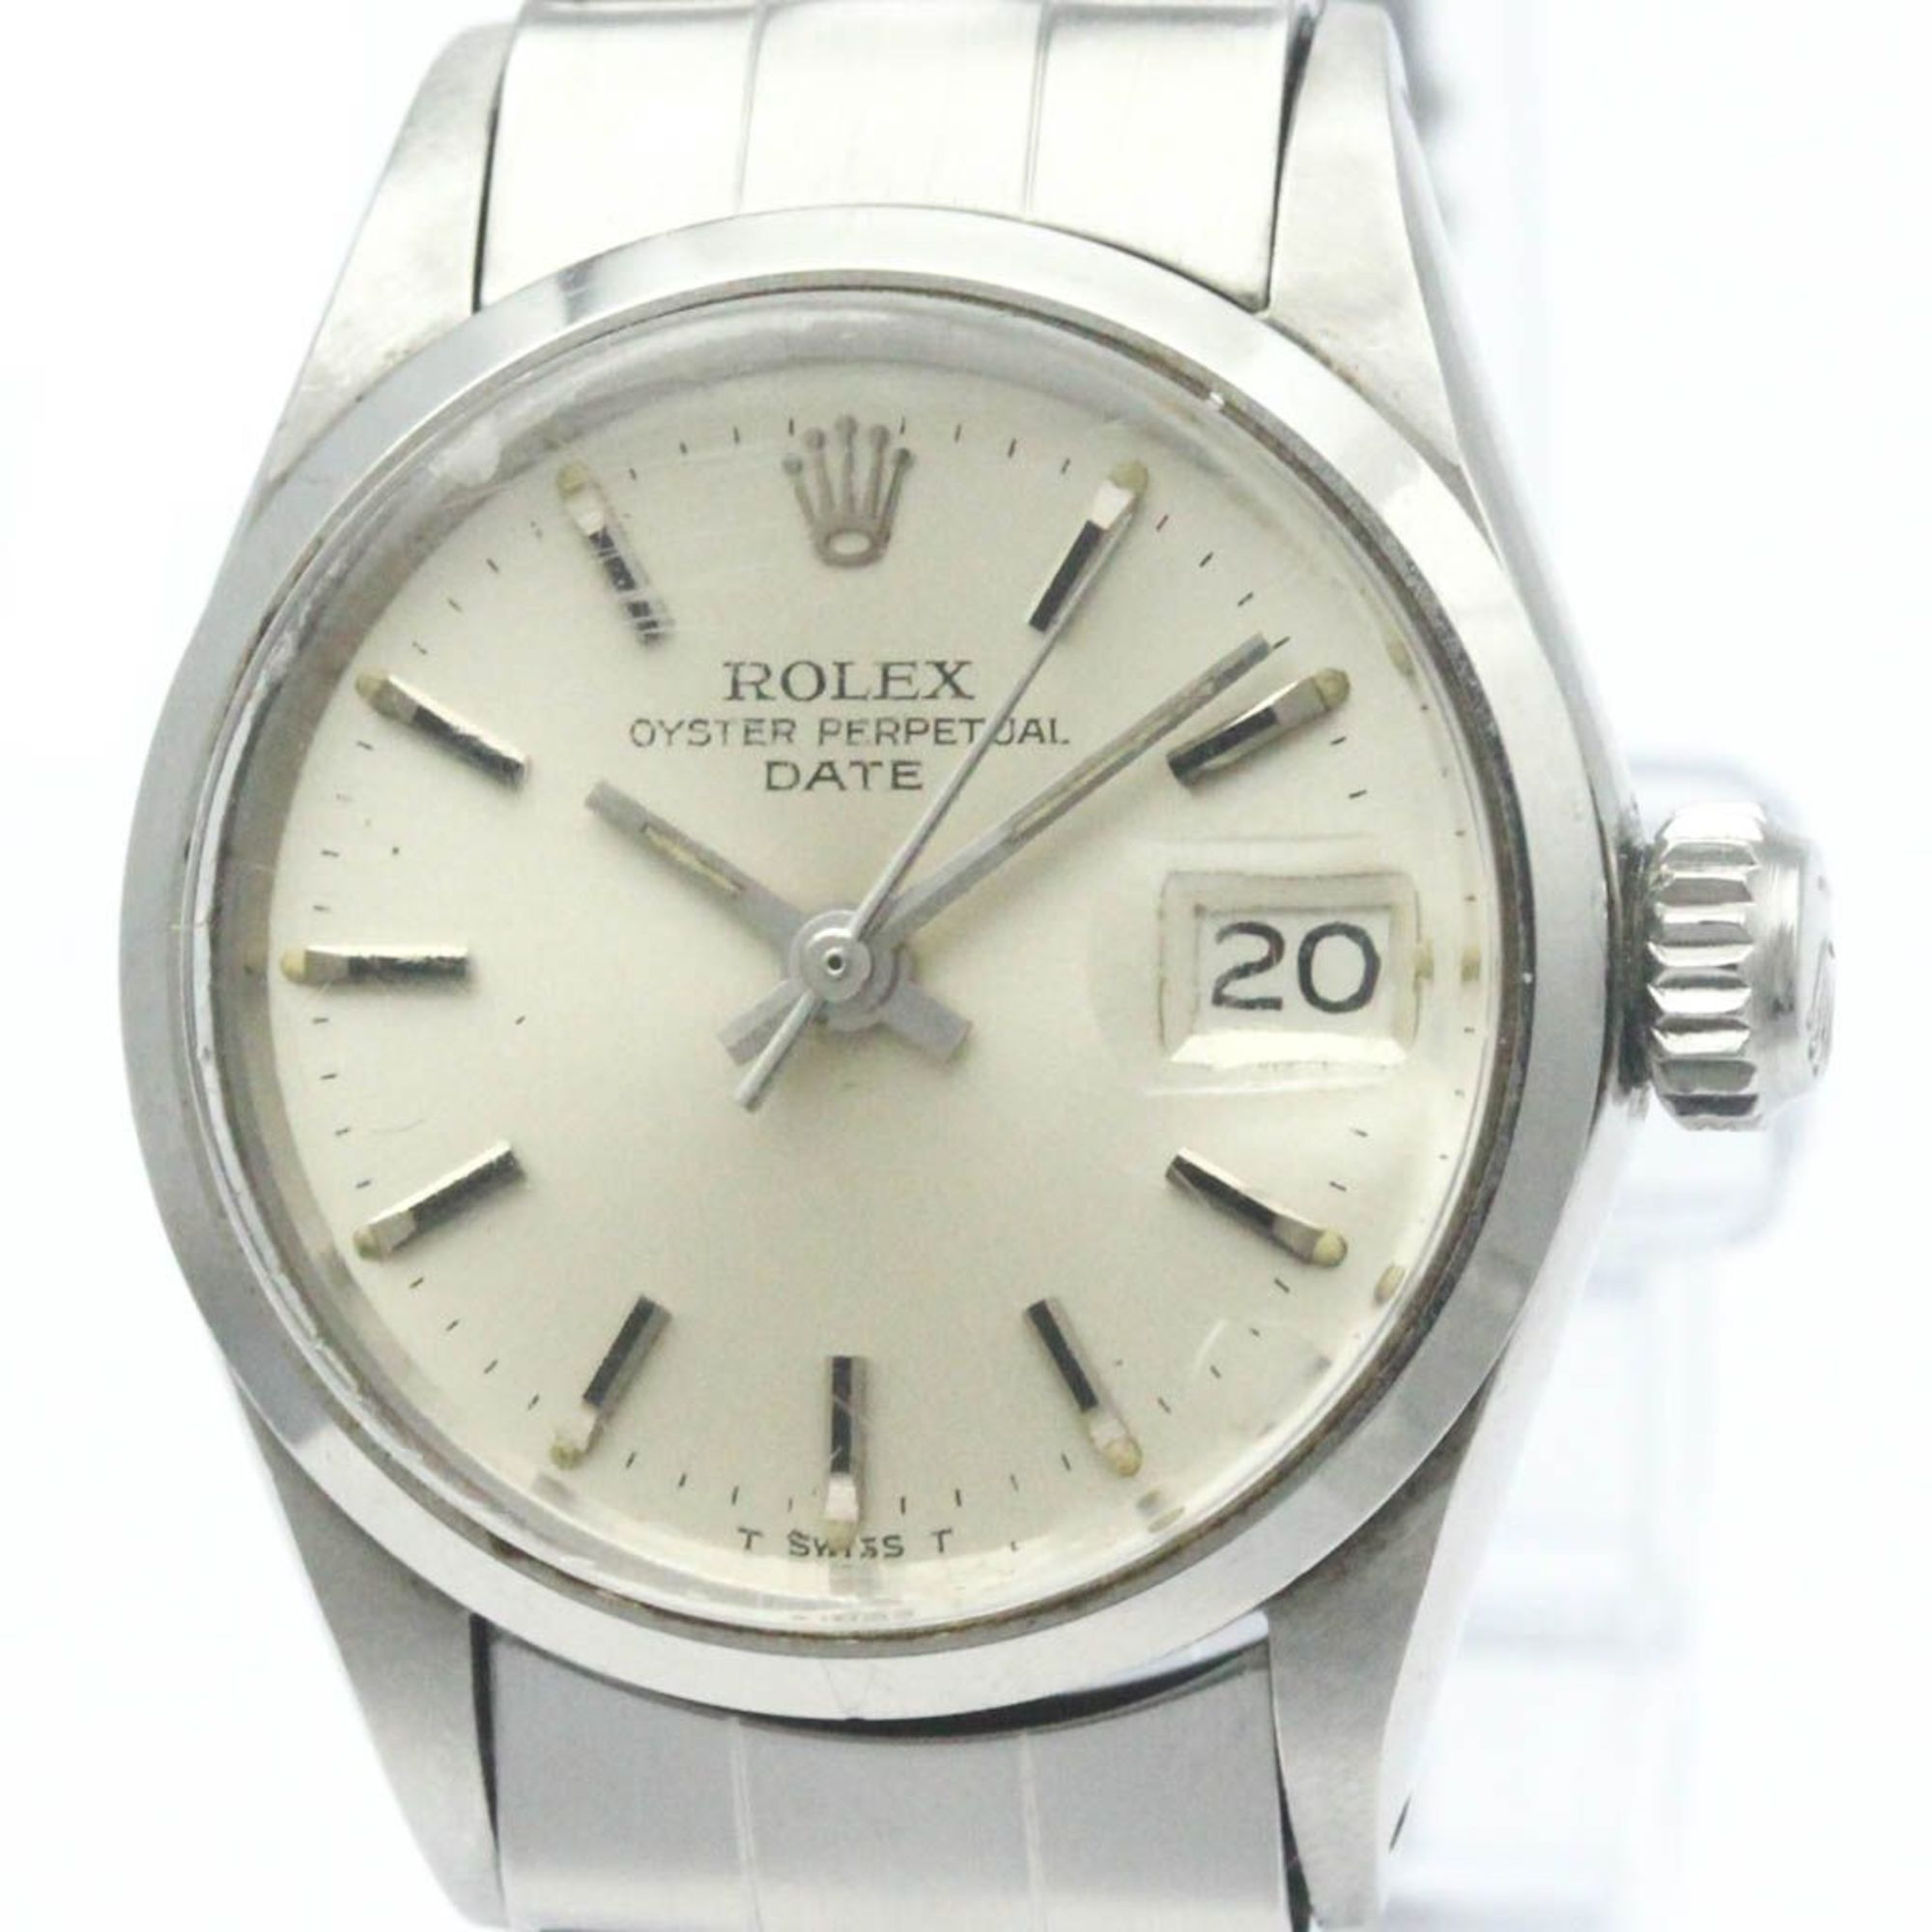 Vintage ROLEX Oyster Perpetual Date 6516 Steel Automatic Ladies Watch BF568472